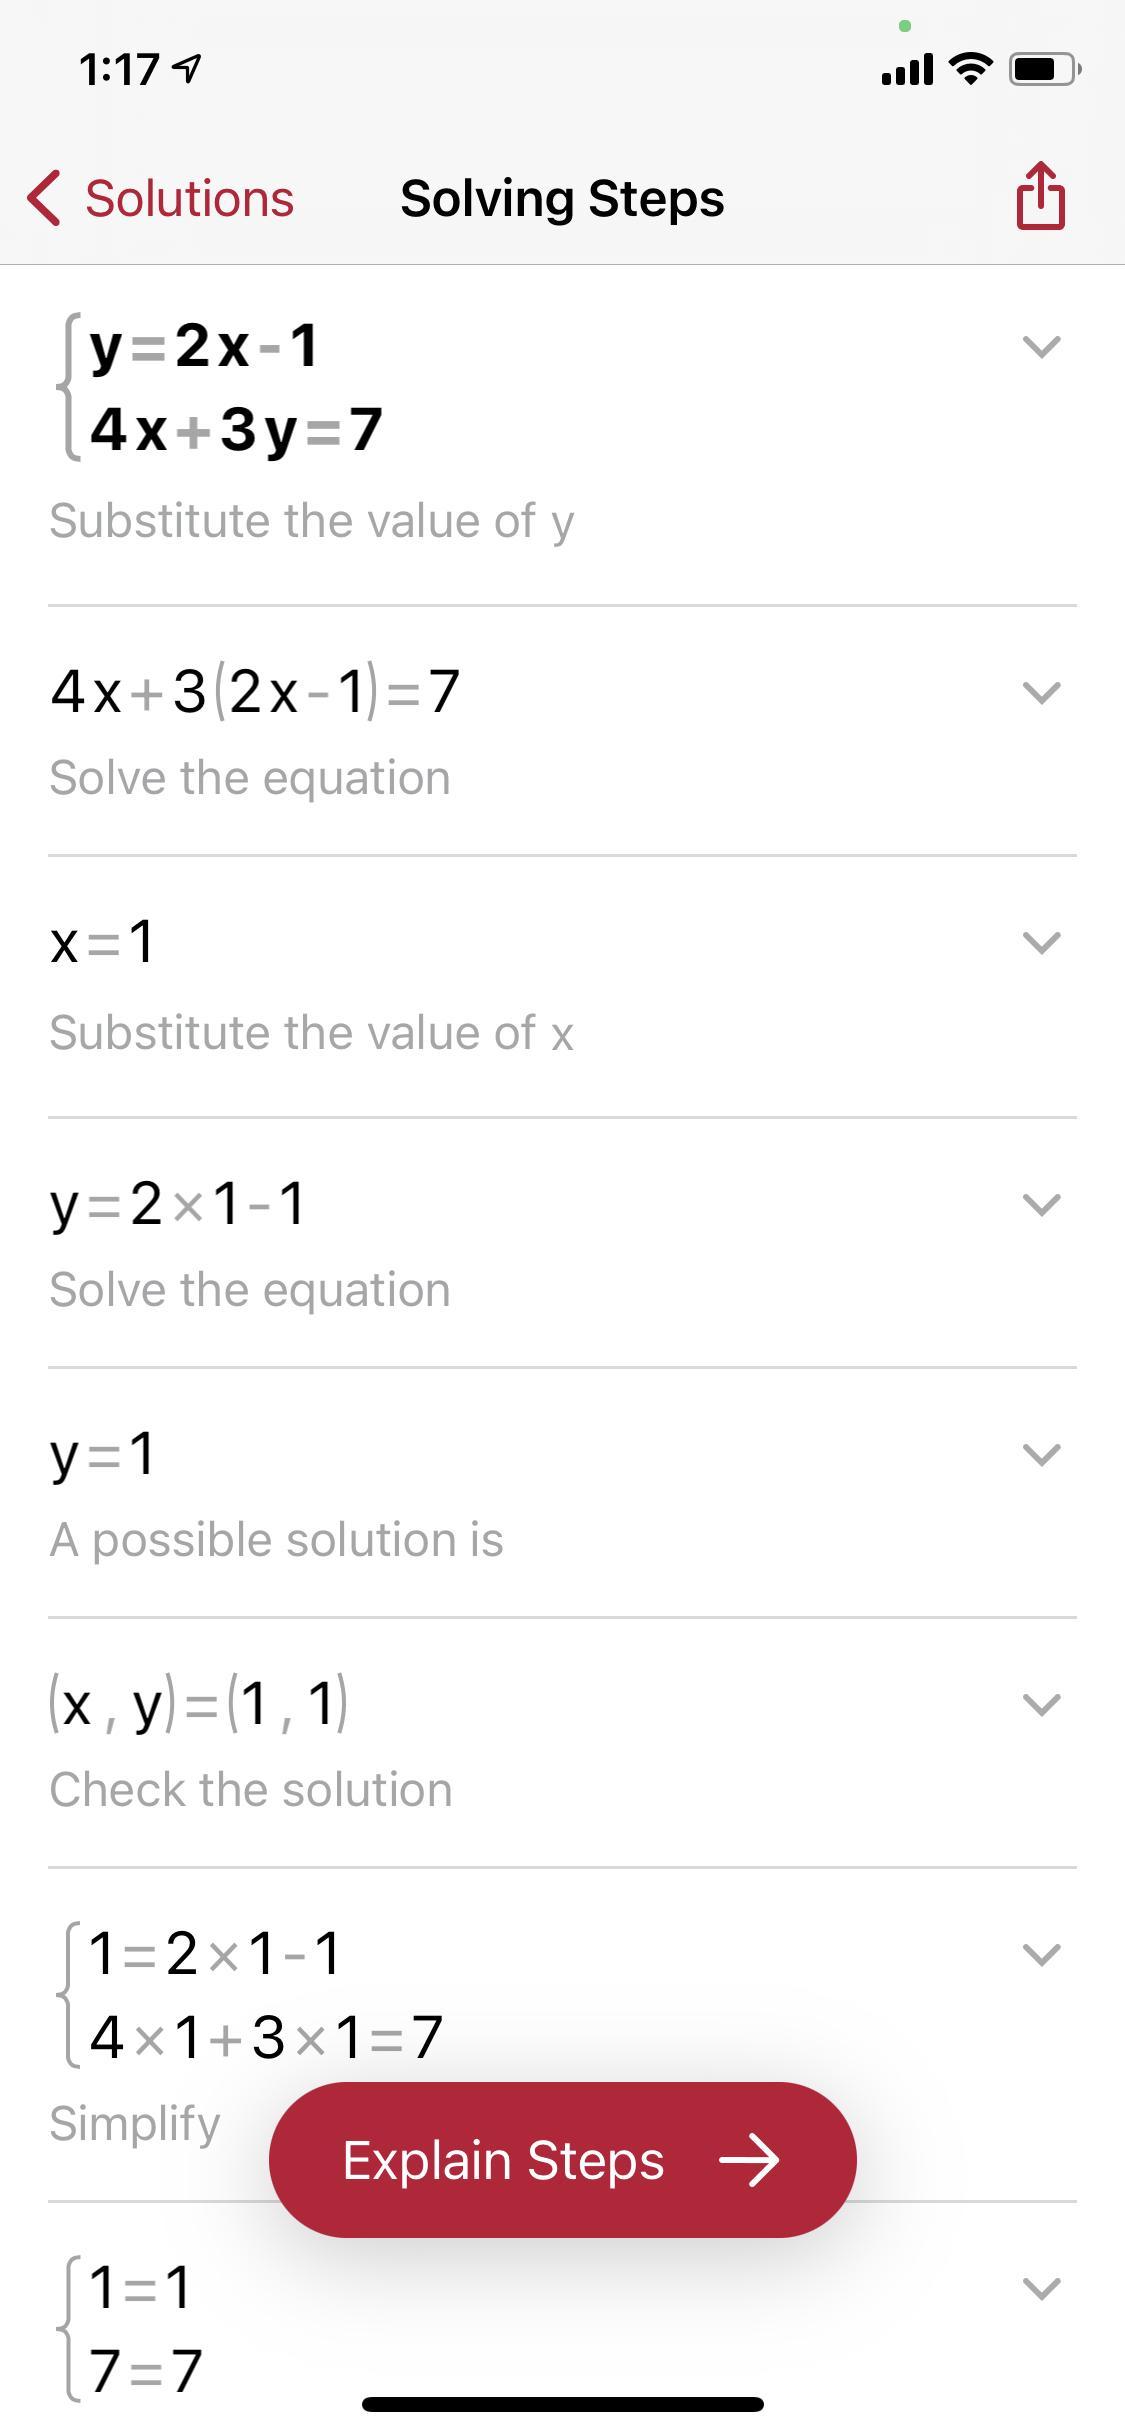 Solve The System UsingsubstitutionY = 2X 14x + 3y = 7